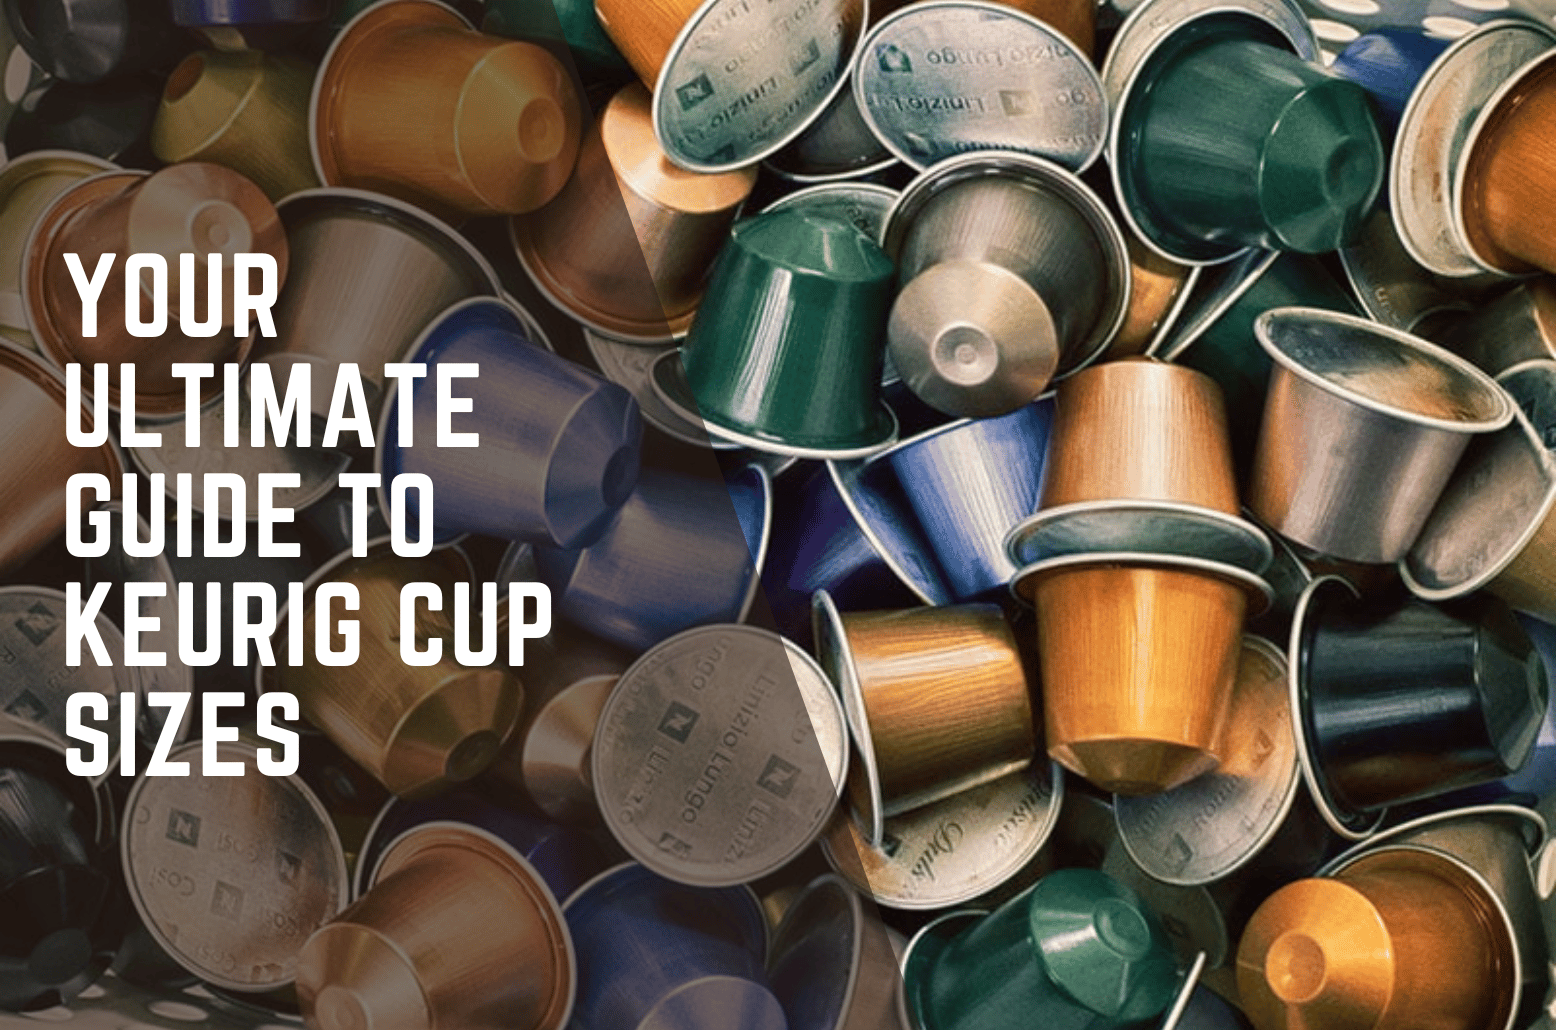 Your Ultimate Guide to Keurig Cup Sizes